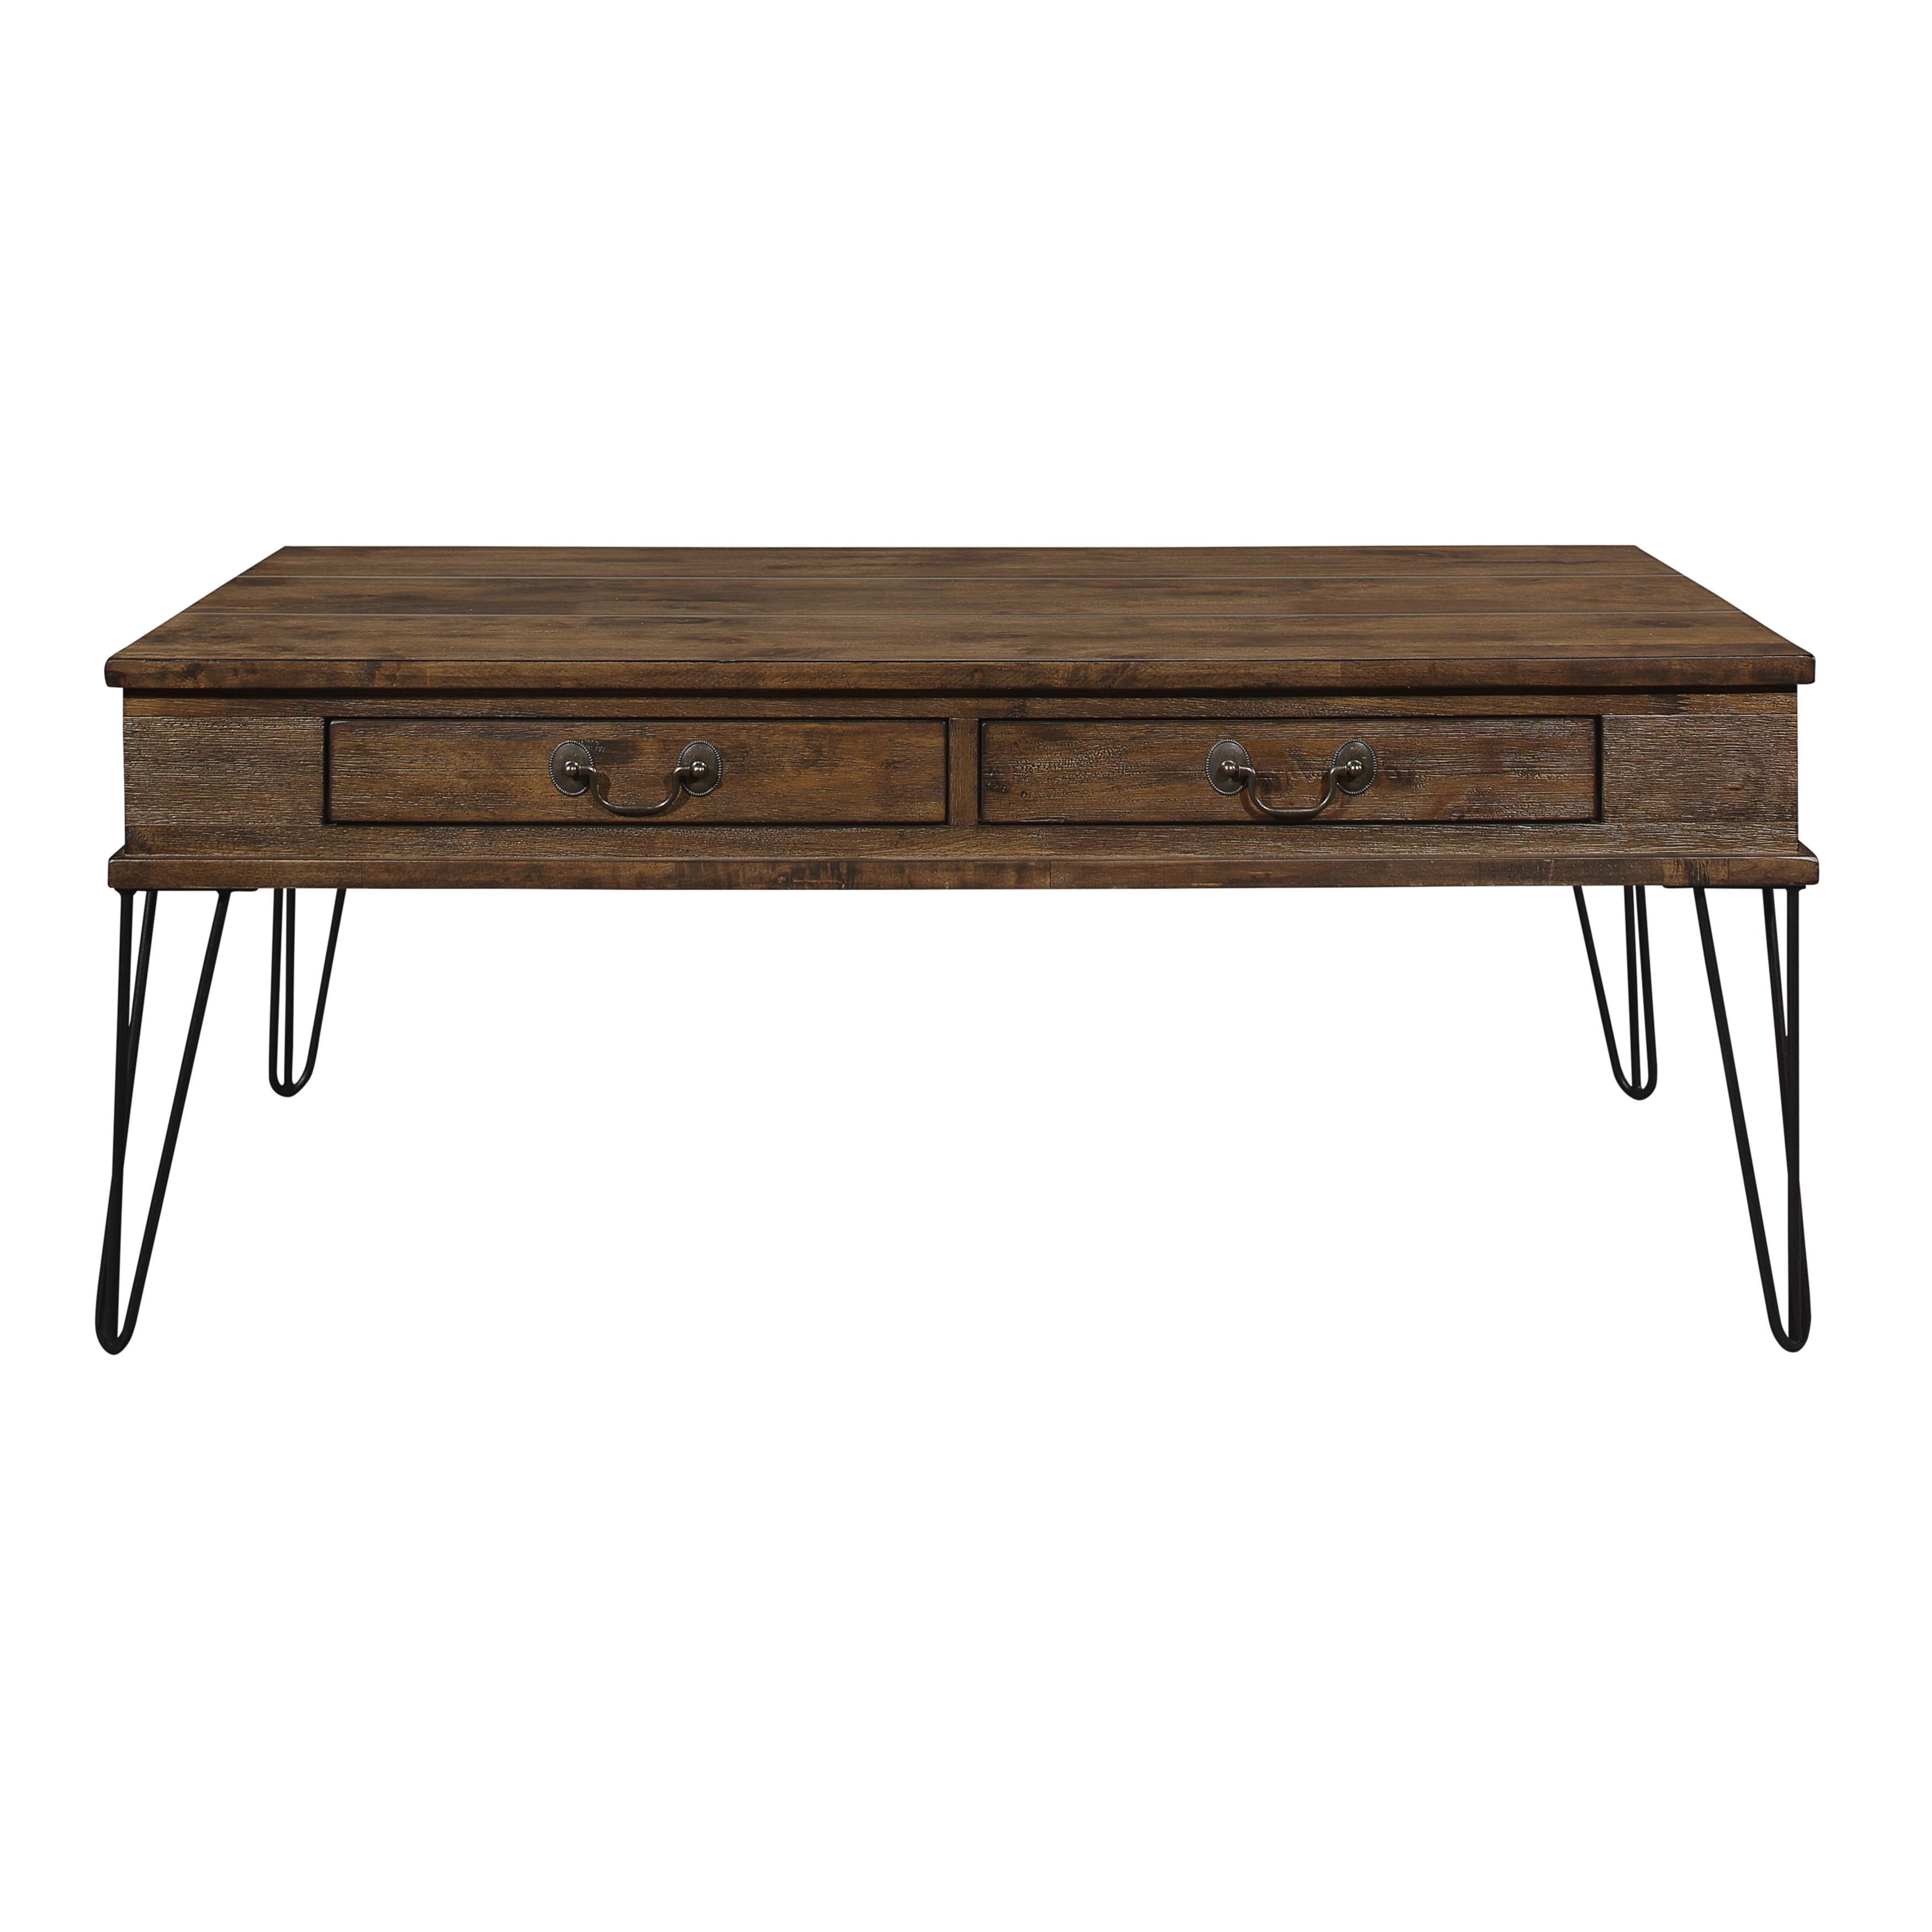 Transitional Cocktail Table 3670M-30 Shaffner 3670M-30 in Oak 